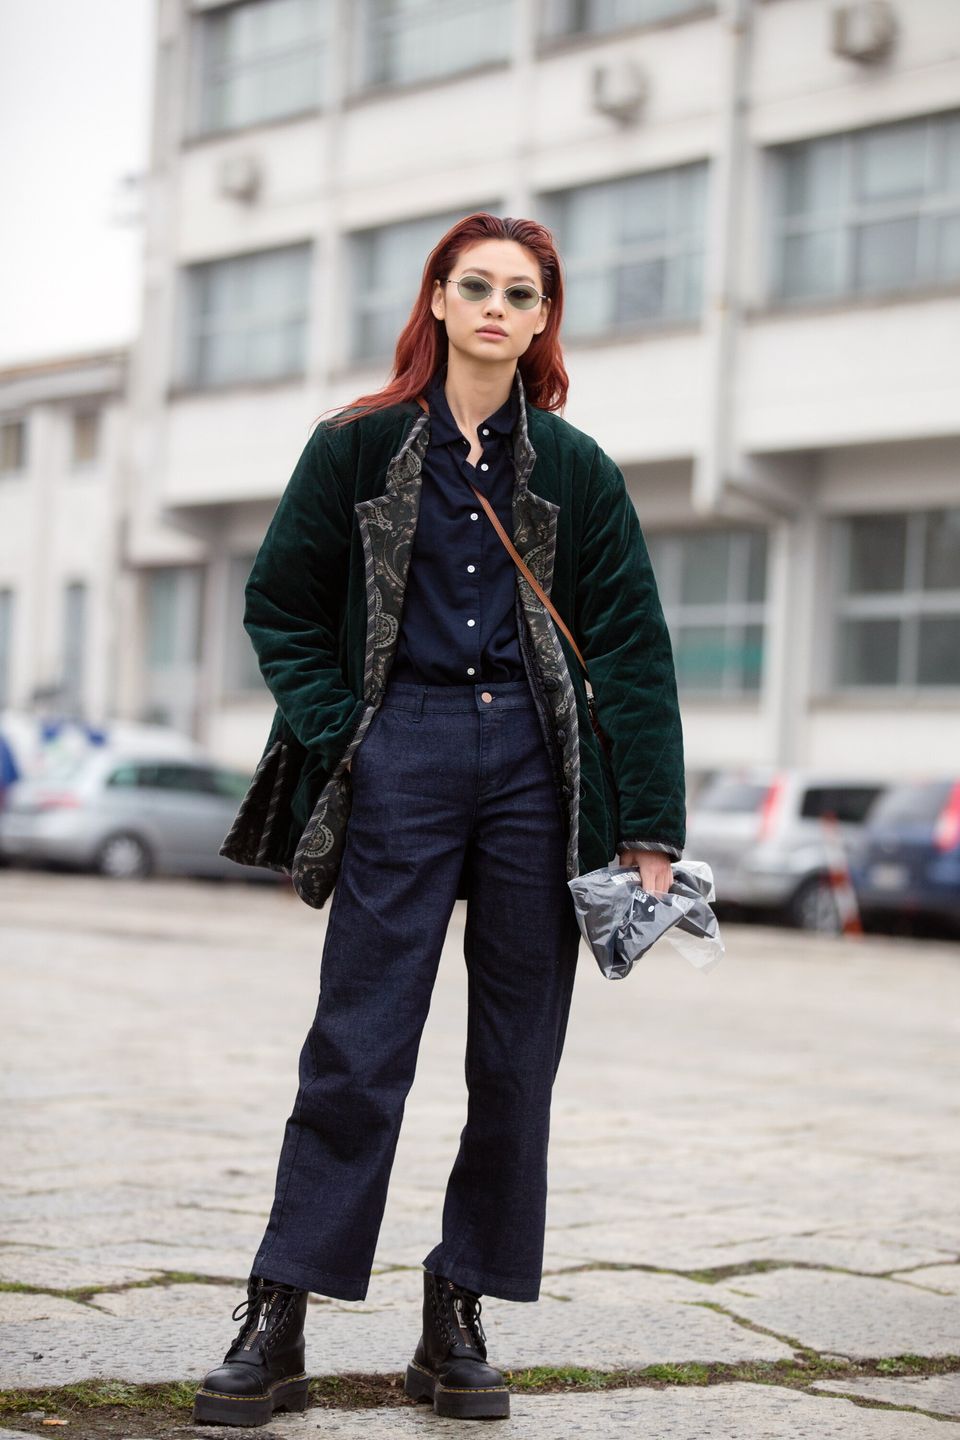 HoYeon Jung & Her Style Have All The Makings Of A Supermodel